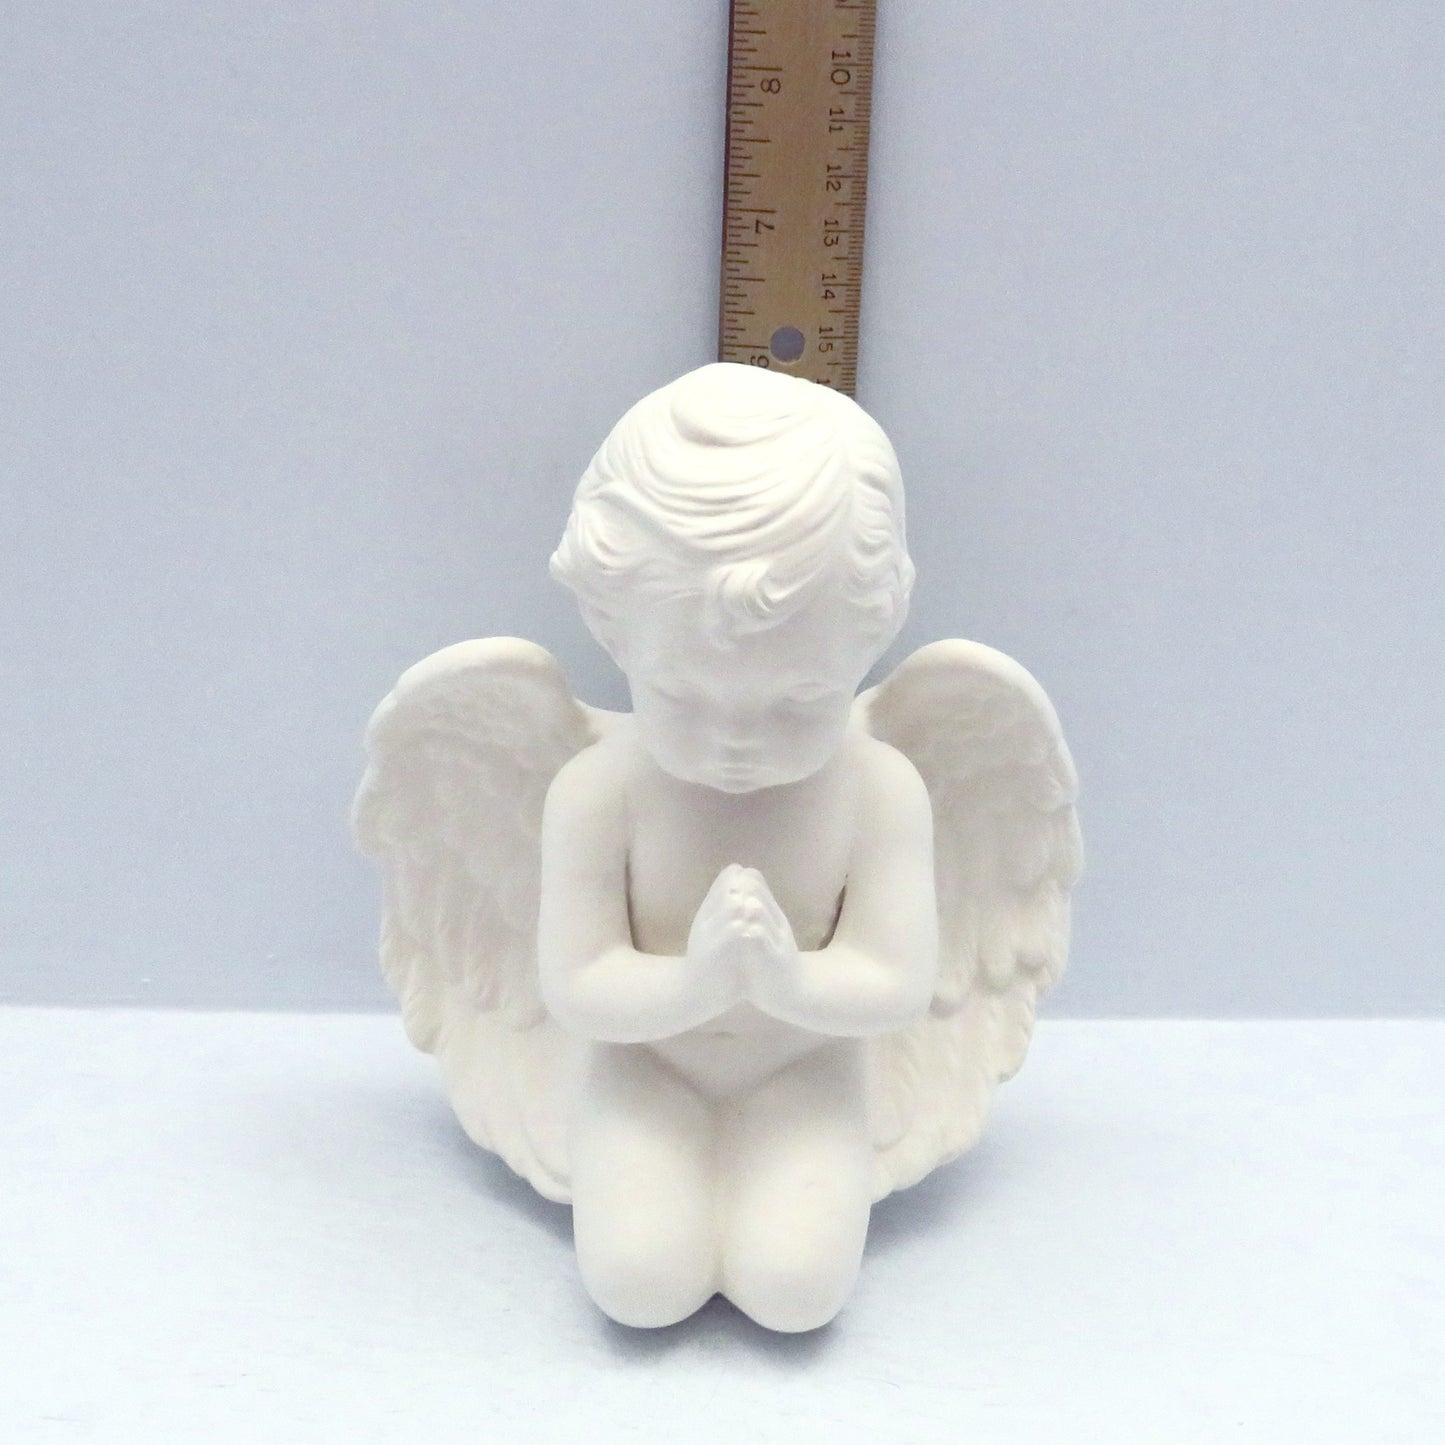 handmade kneeling cherub near a ruler showing it to be 6 inches tall